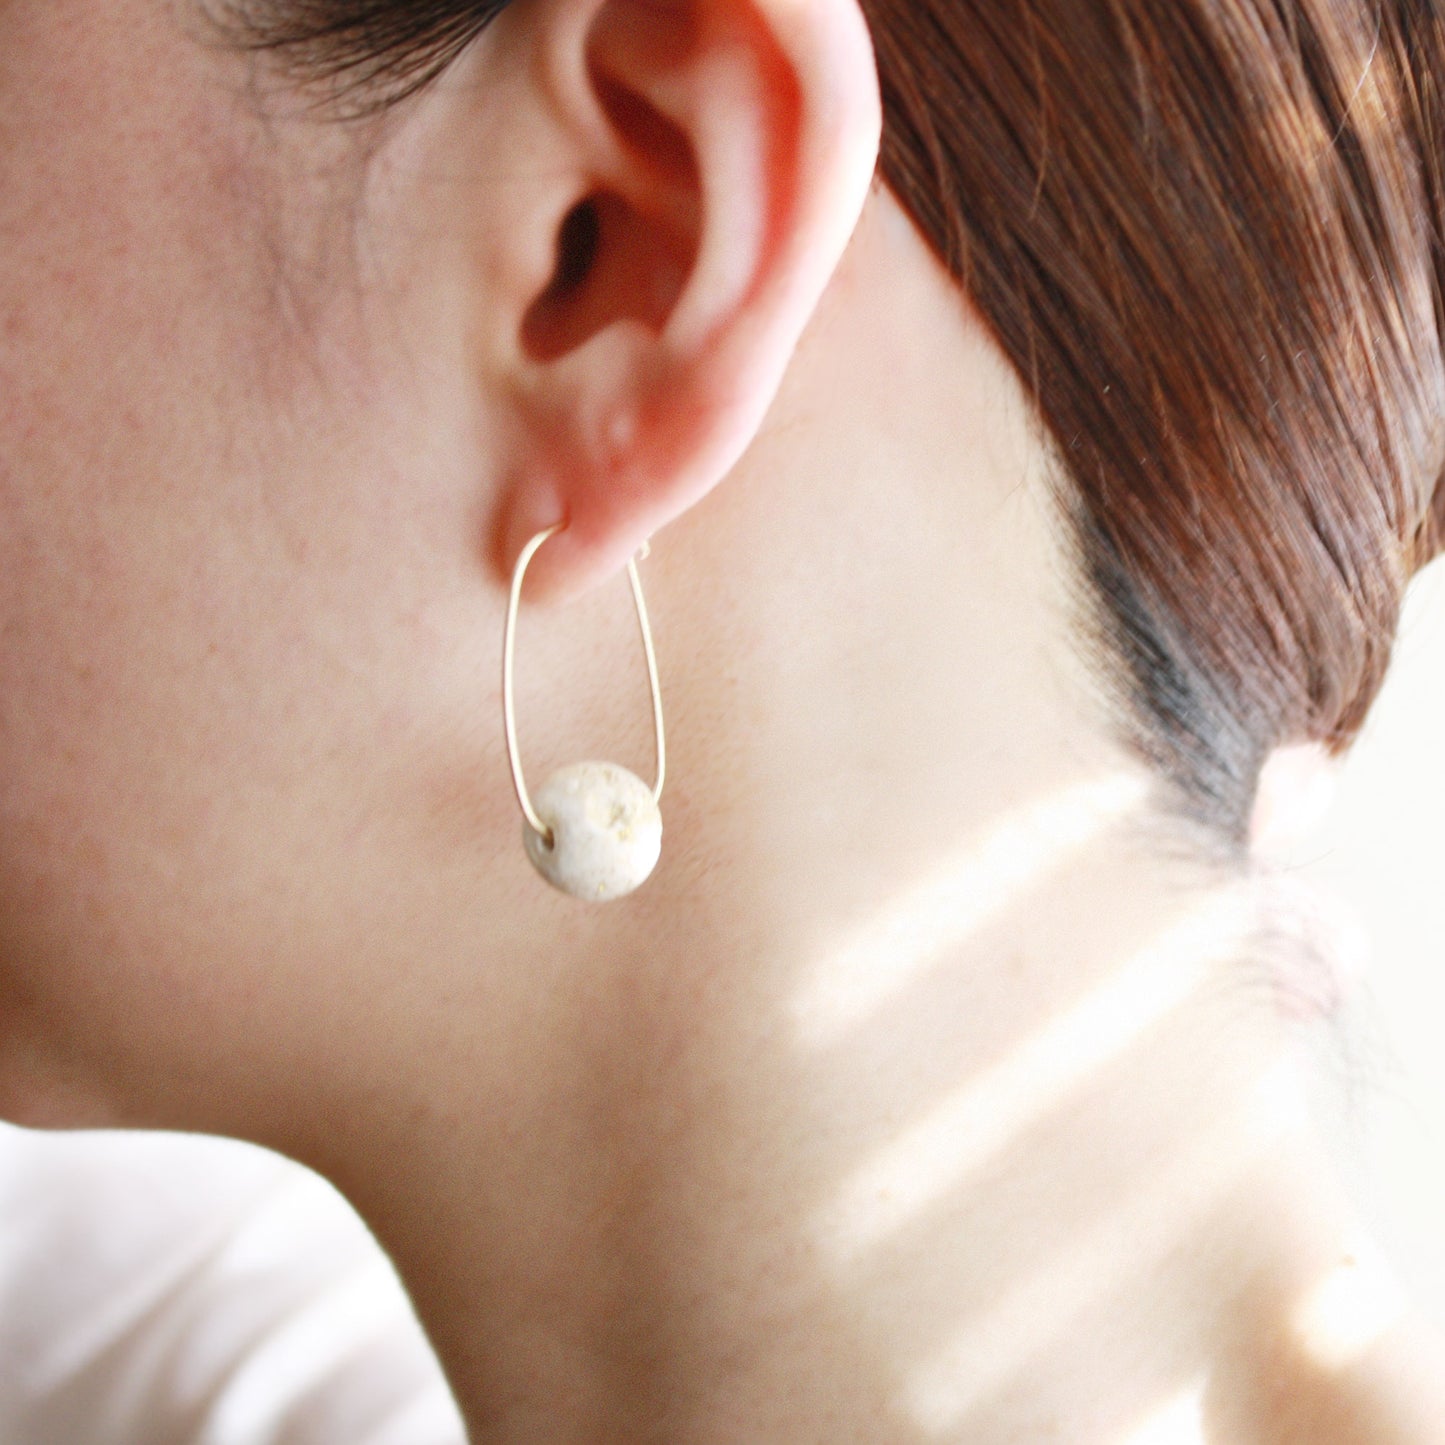 Oval Hoop Earrings with Small White Balls